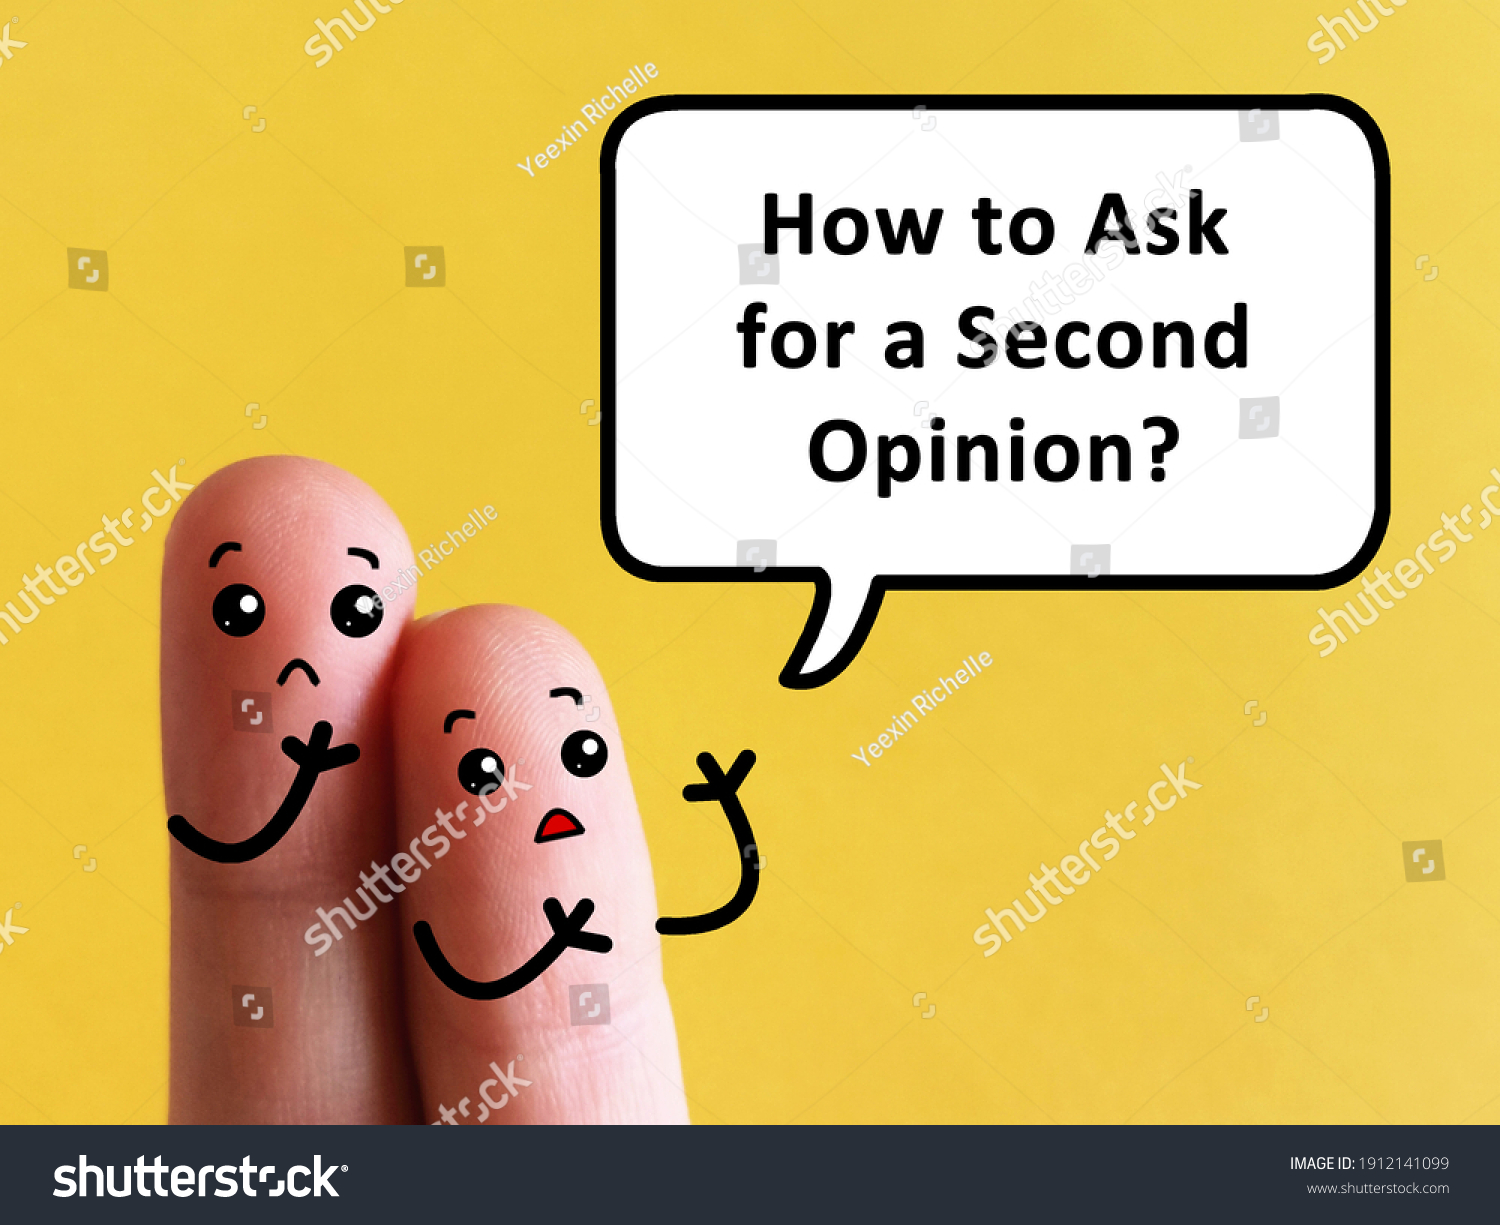 Two fingers are decorated as two person. One of them is asking how to ask for a second opinion. #1912141099